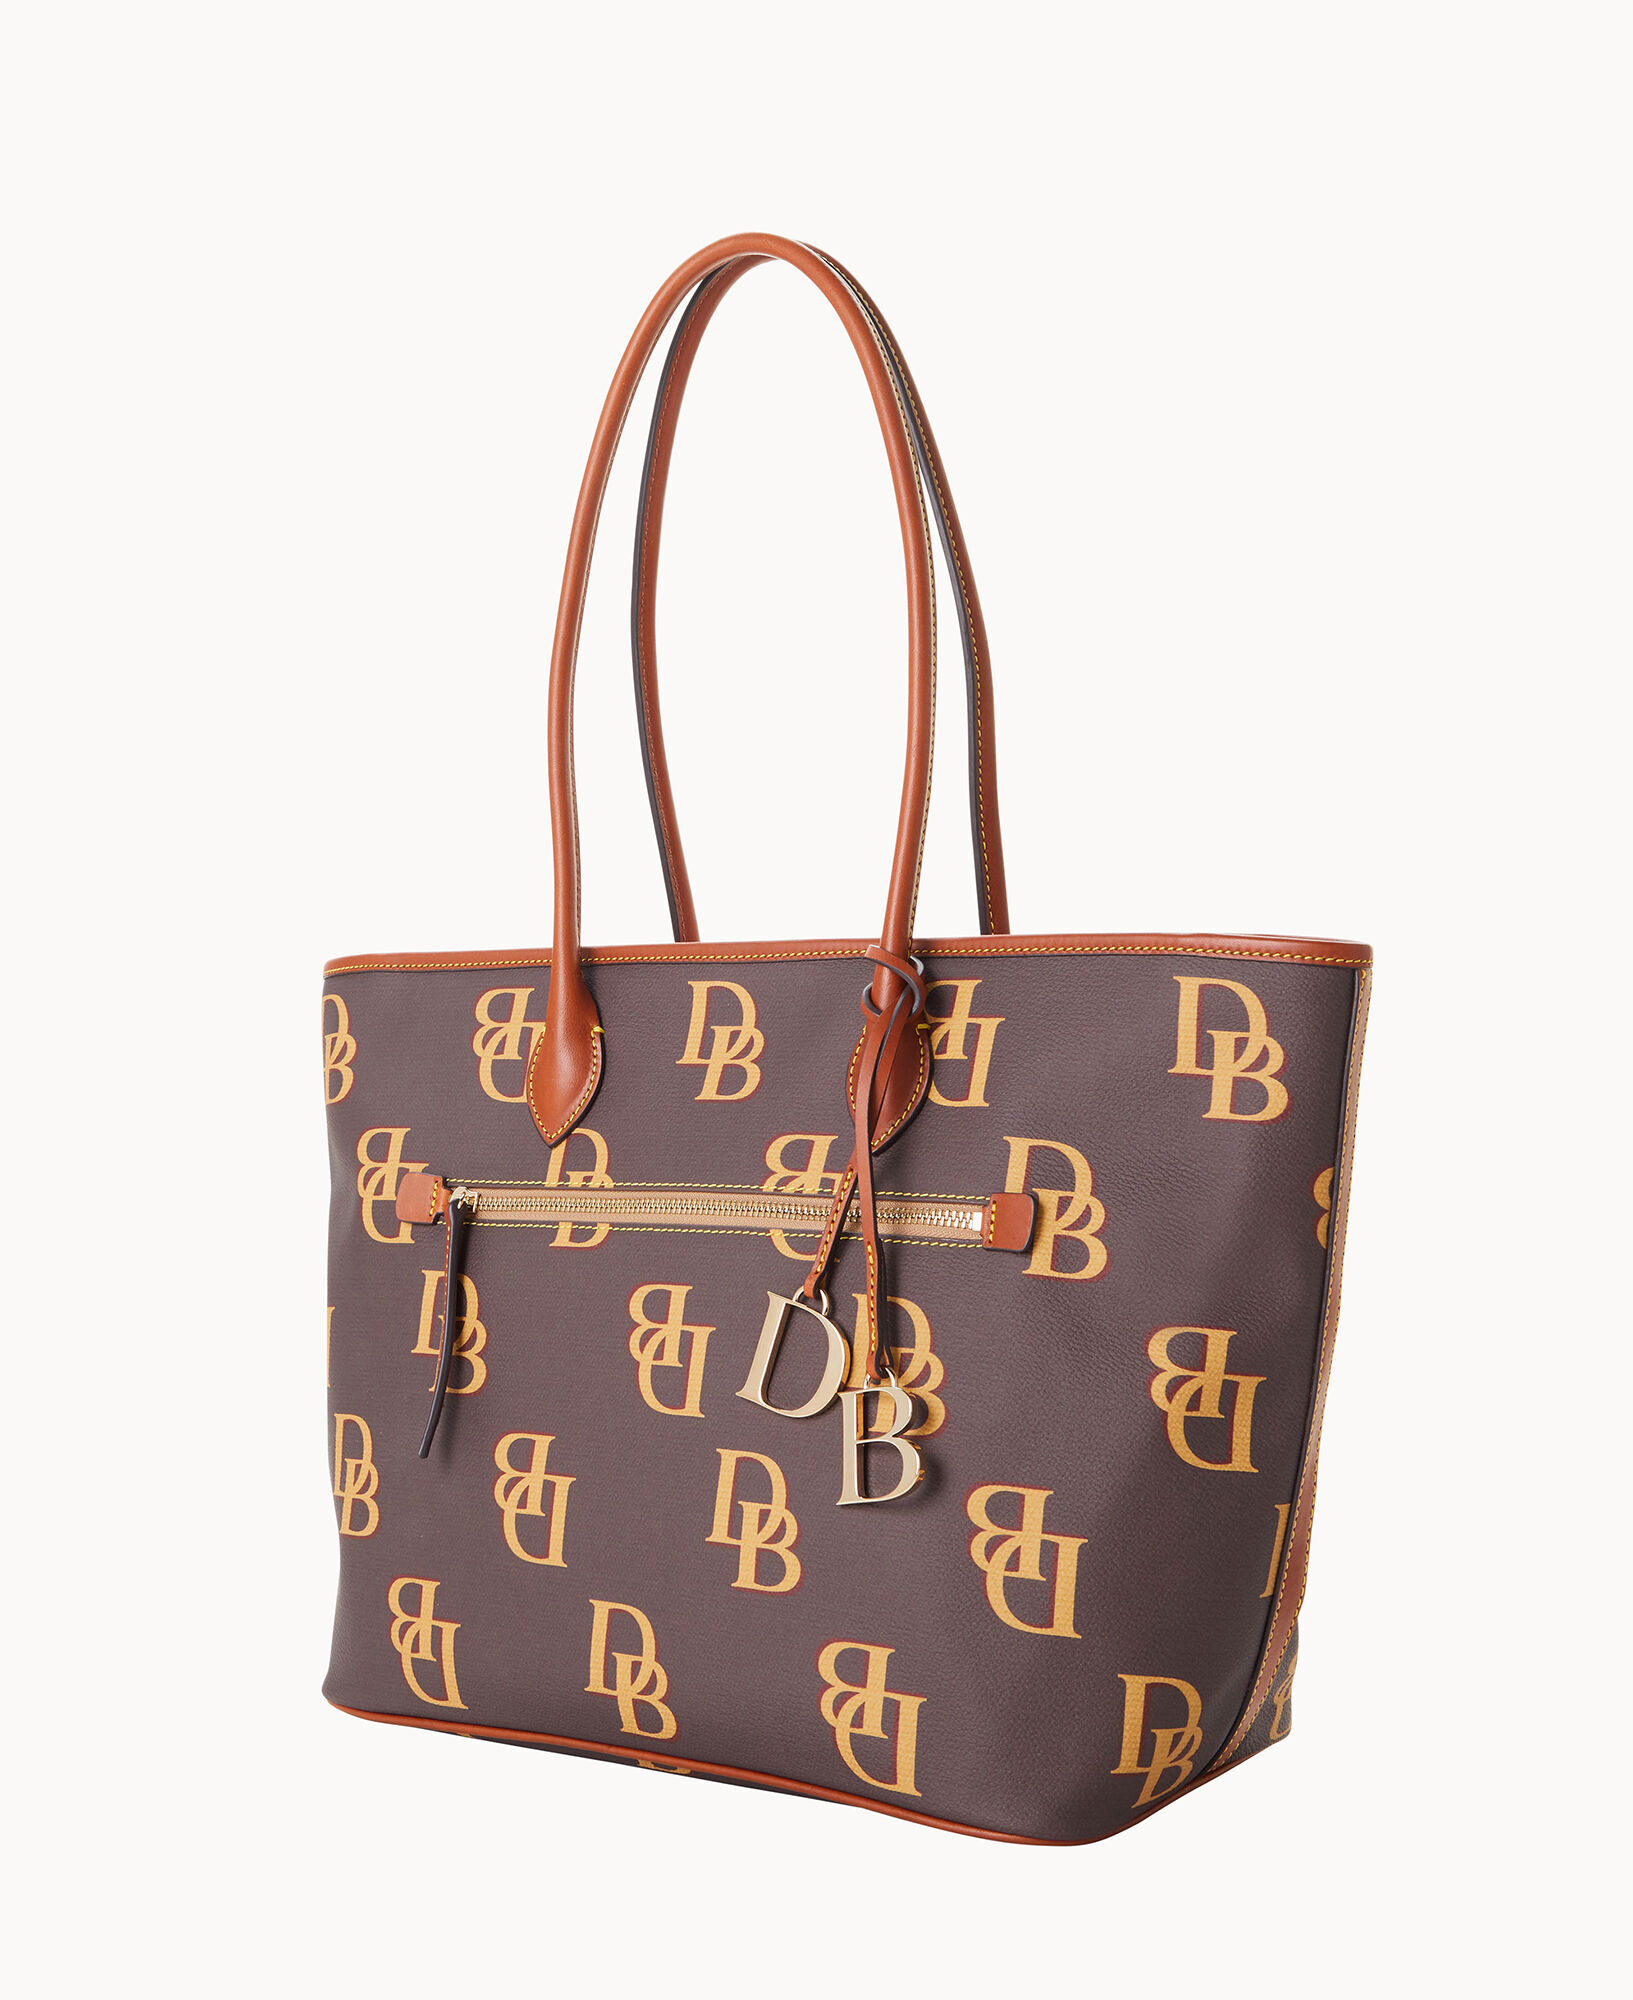 Dooney & Bourke Coupons: Up to 30% Off - November 2023